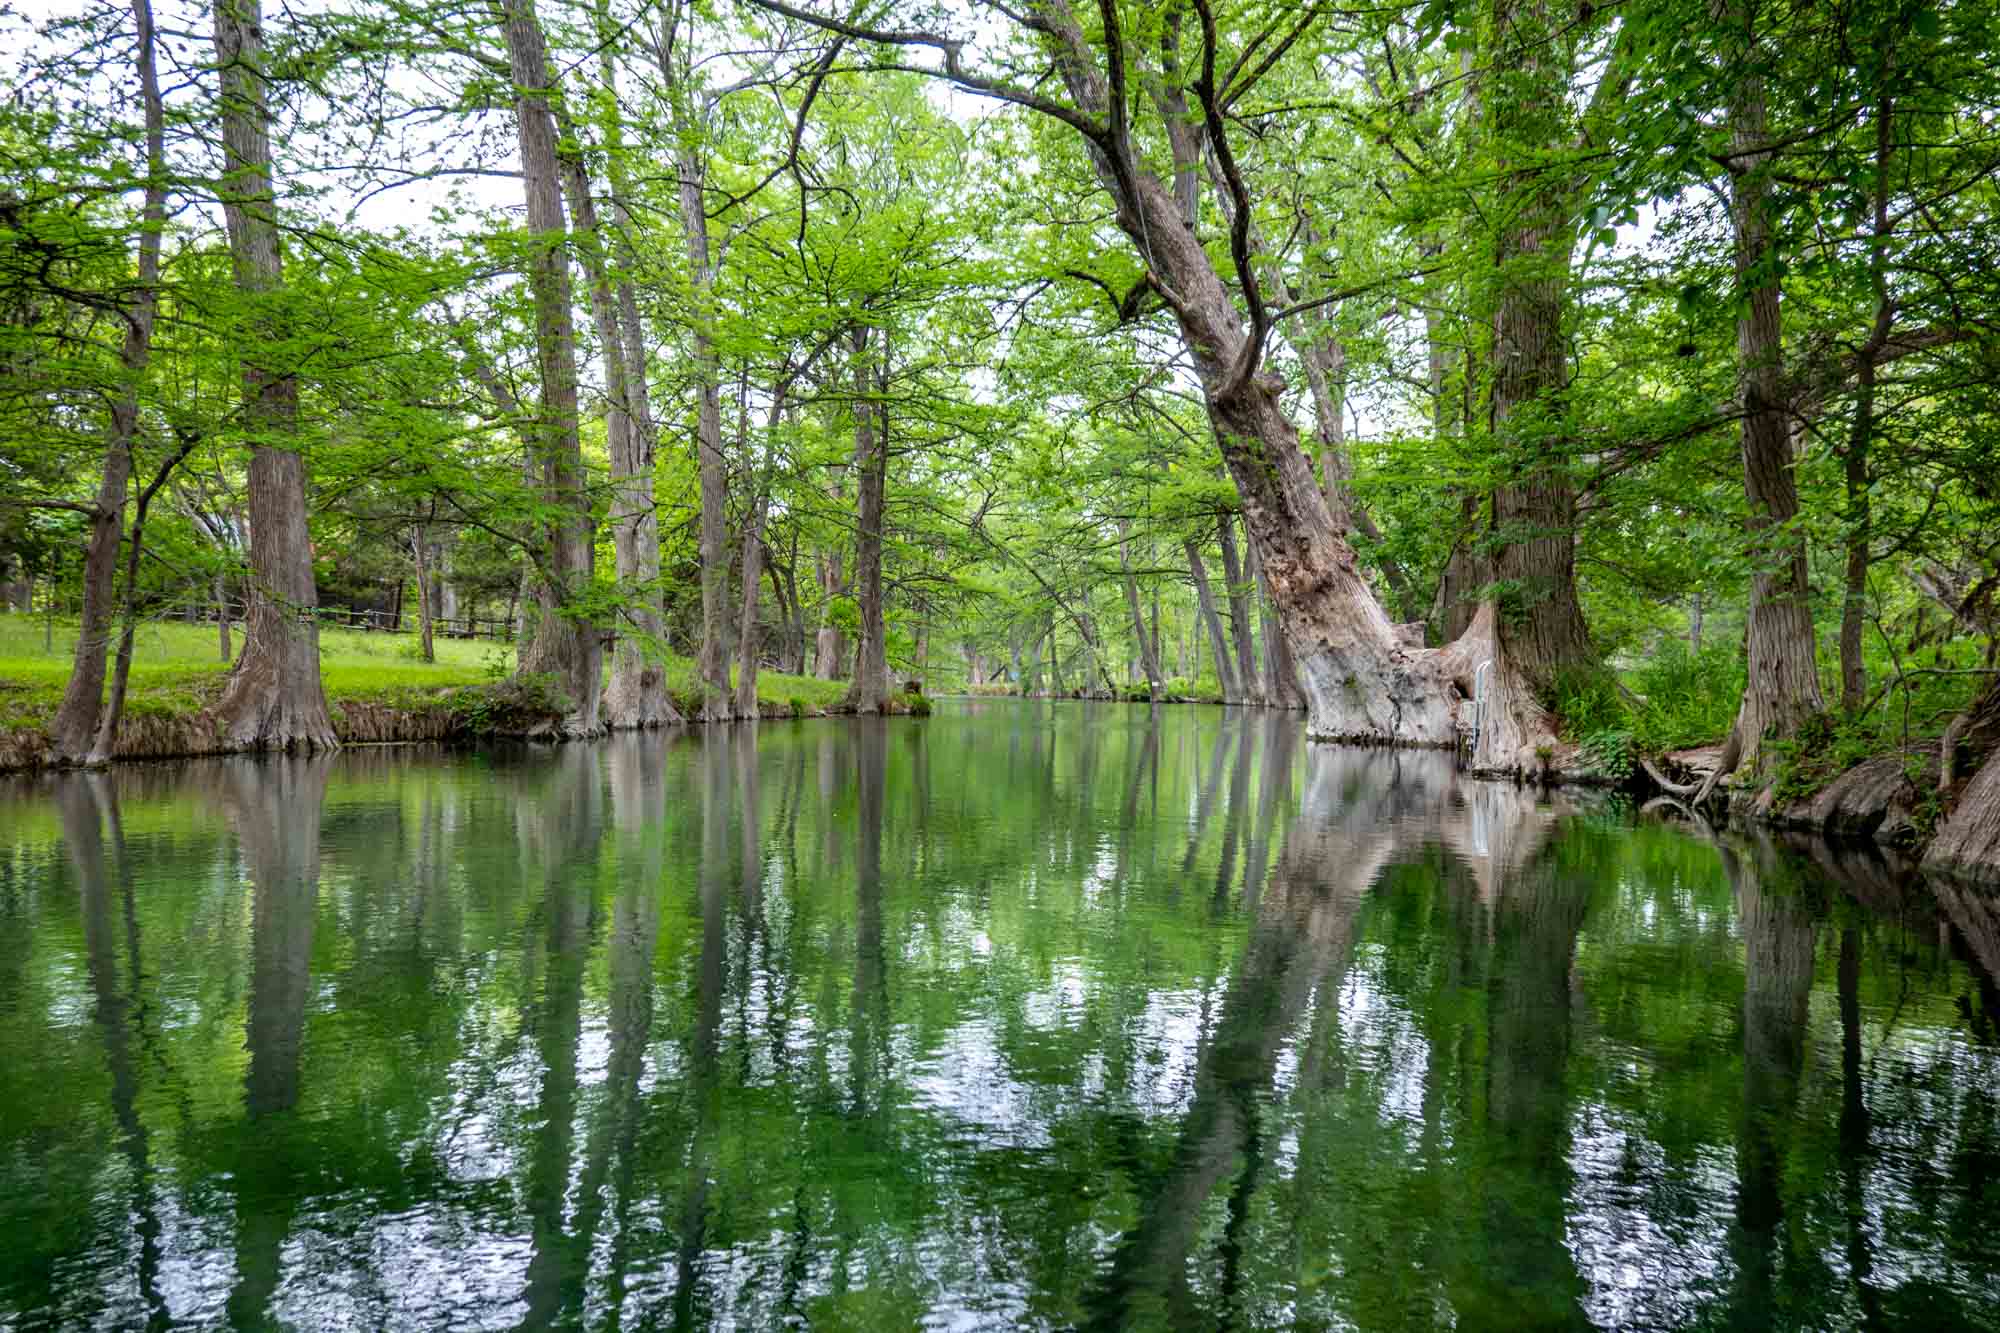 Cypress trees lining the sides of a natural swimming hole.